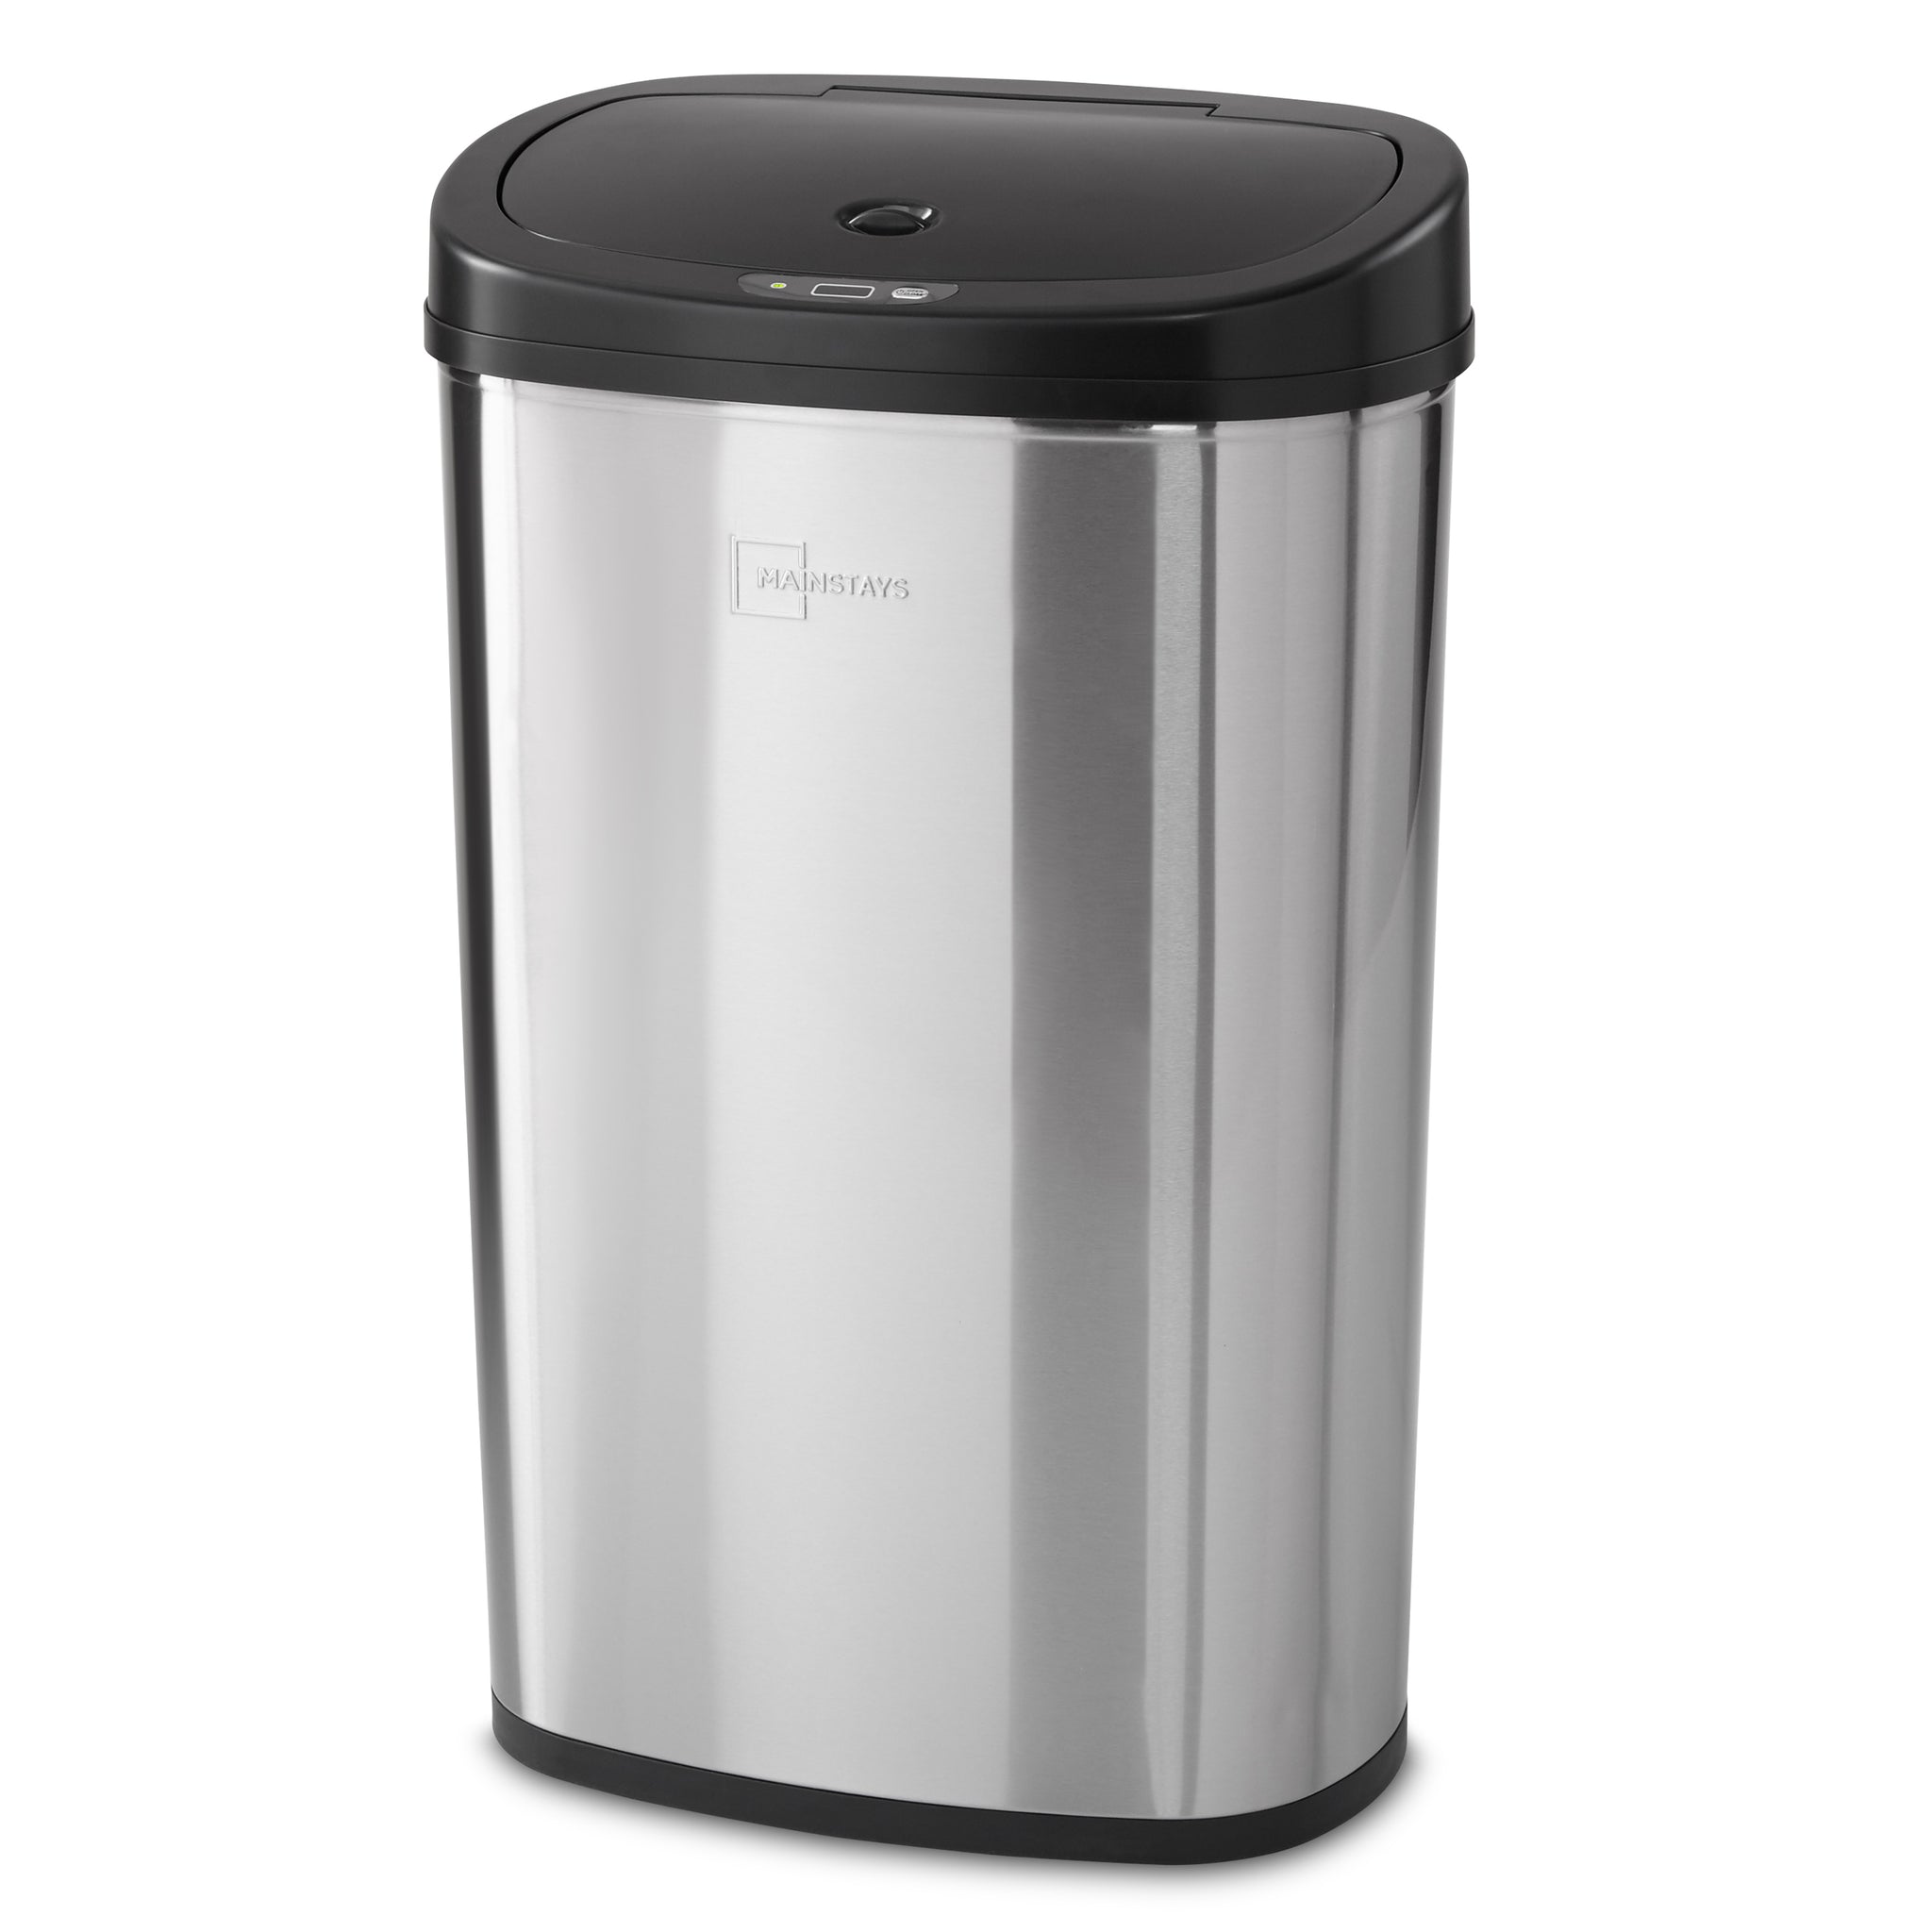 Mainstays Motion Sensor Trash Can 13.2 Gallon in Stainless Steel only $35.00